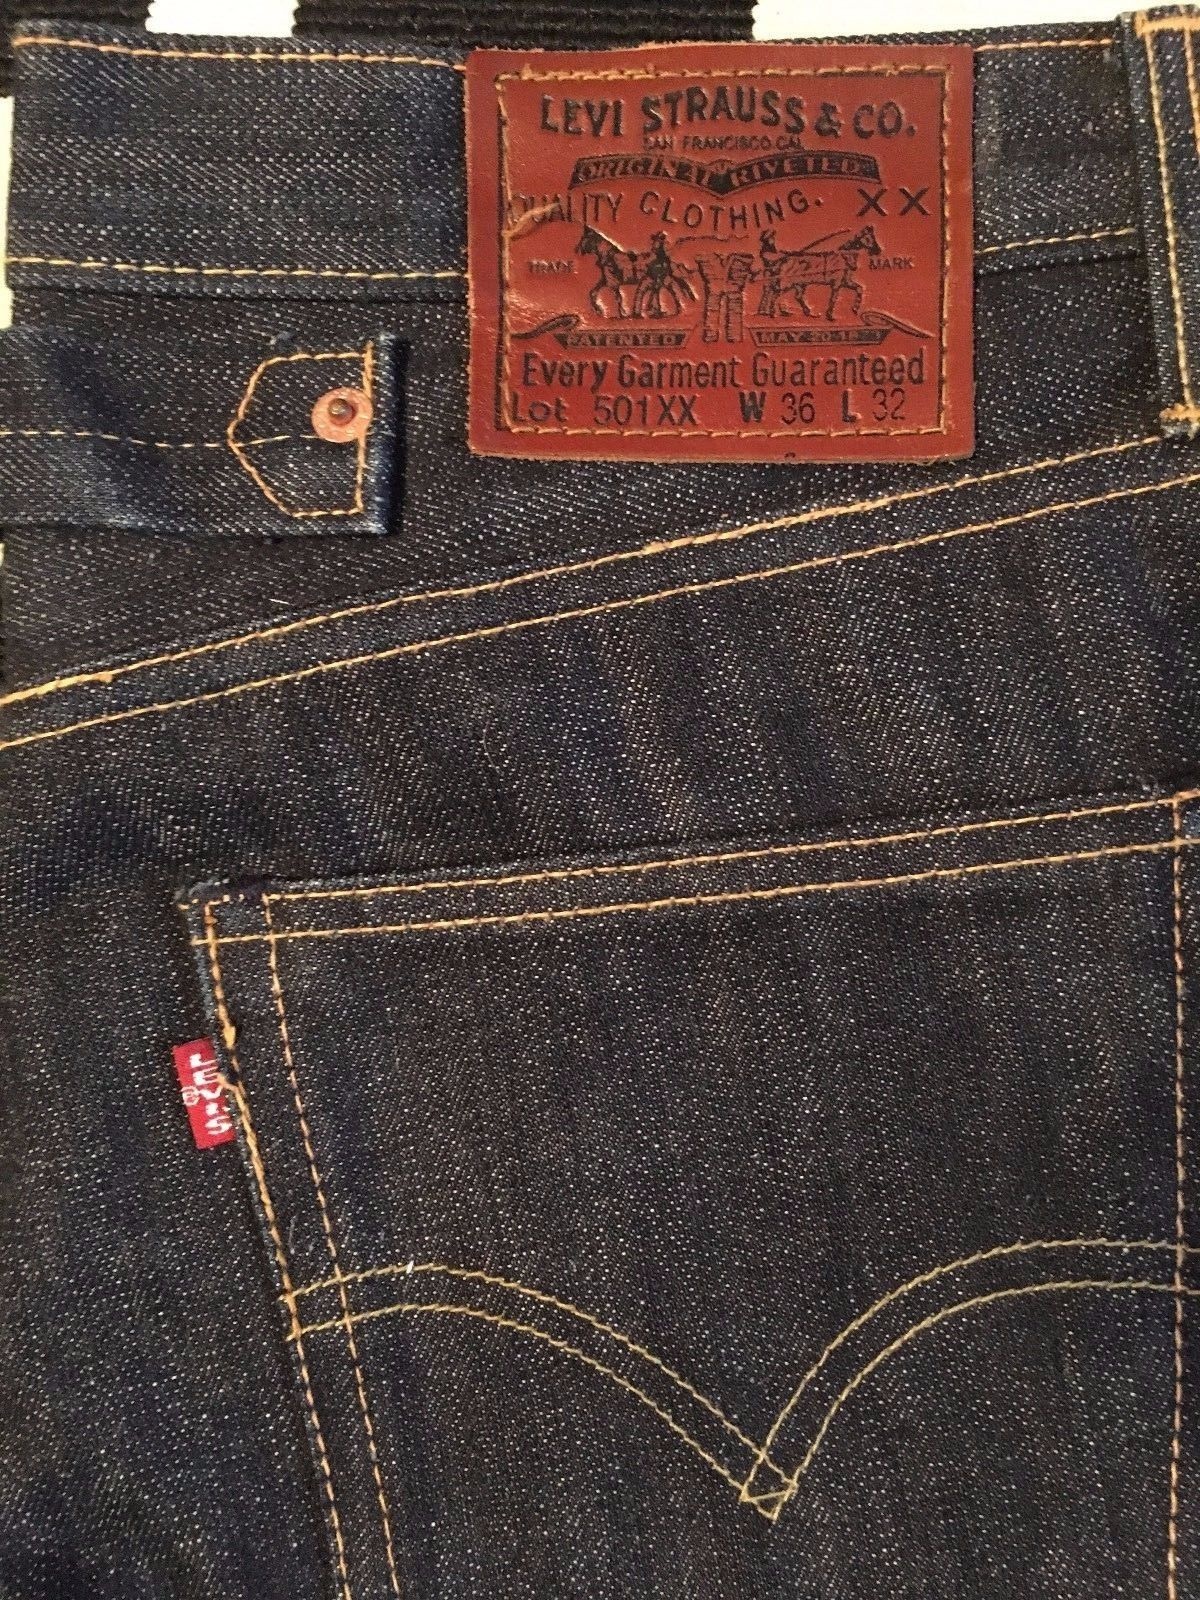 red tag levi jeans value